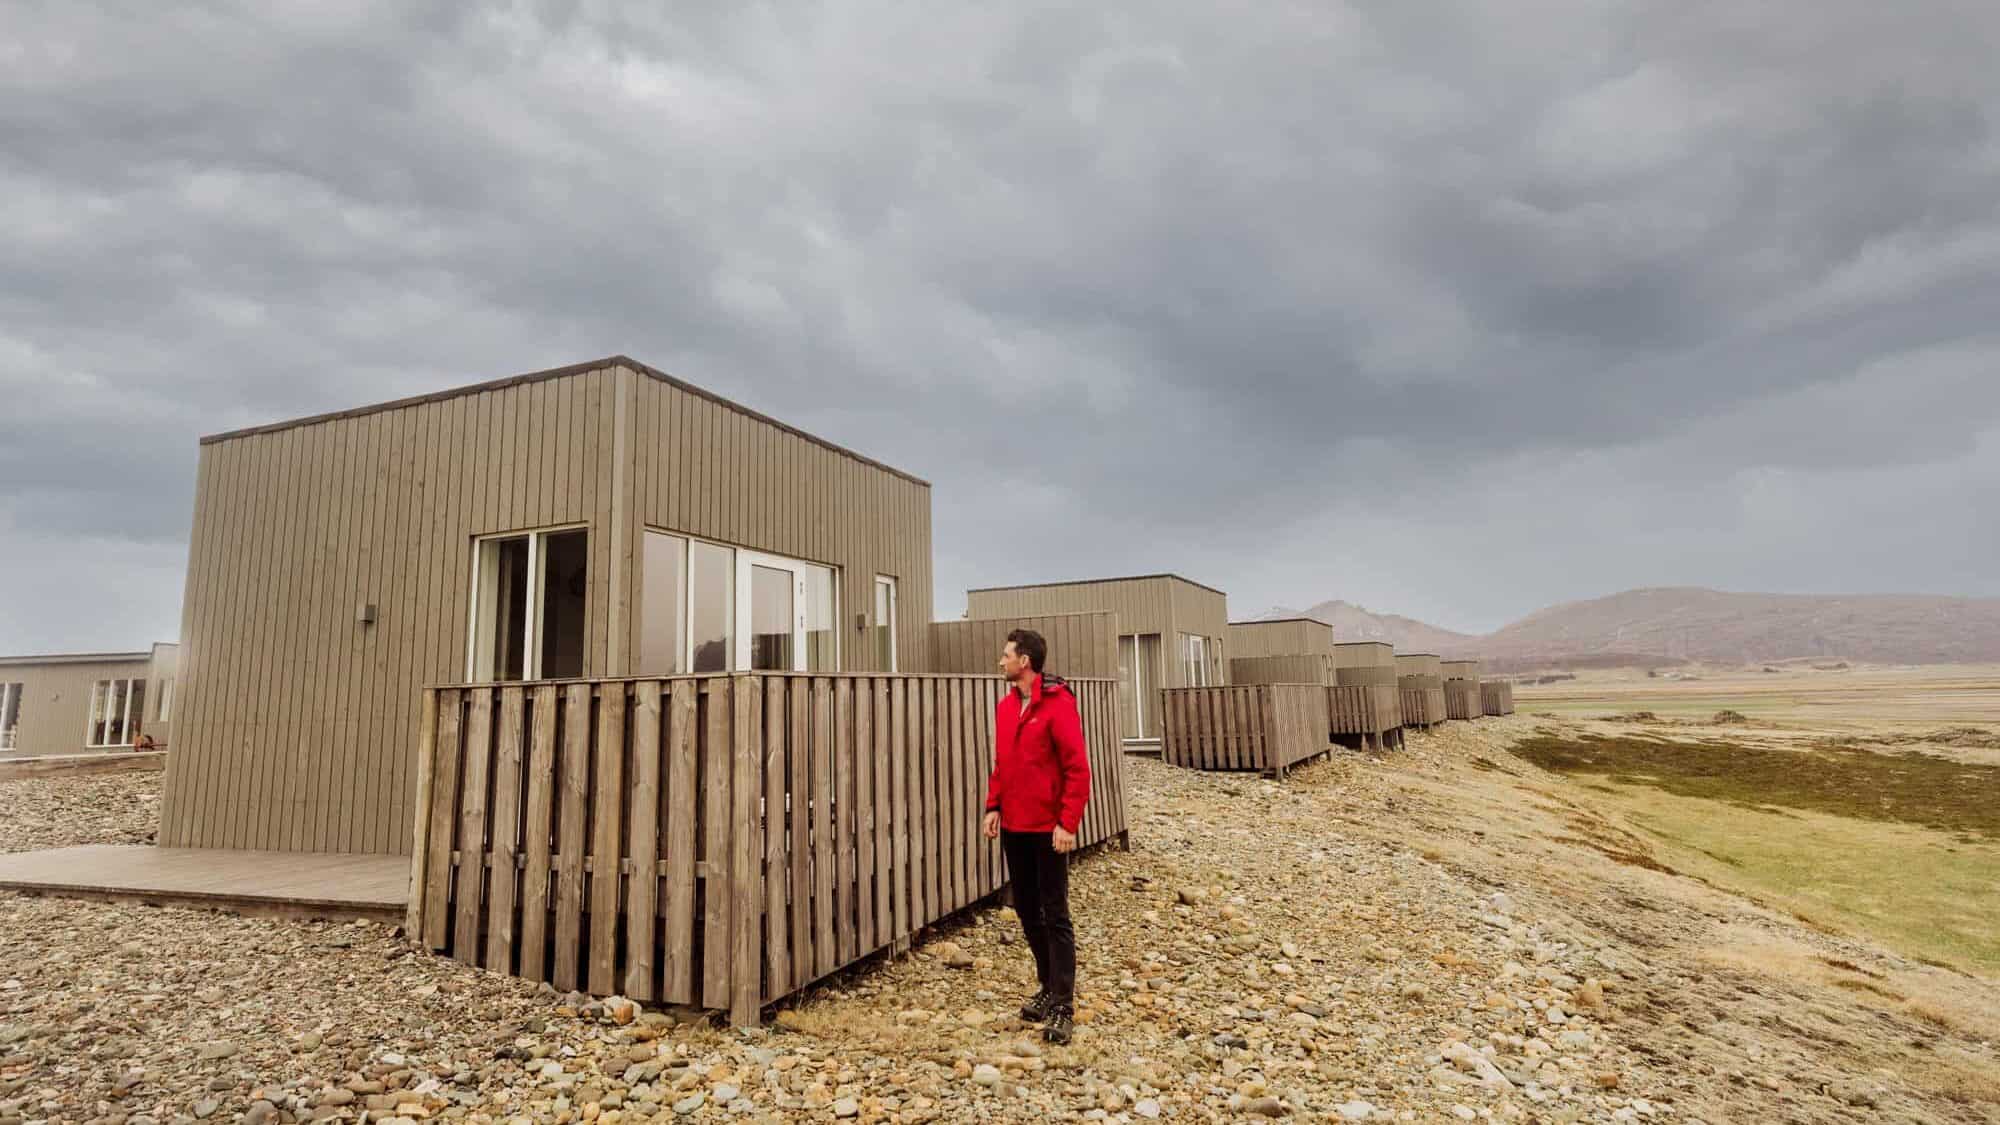 One of the coolest hotels in iceland: cabins